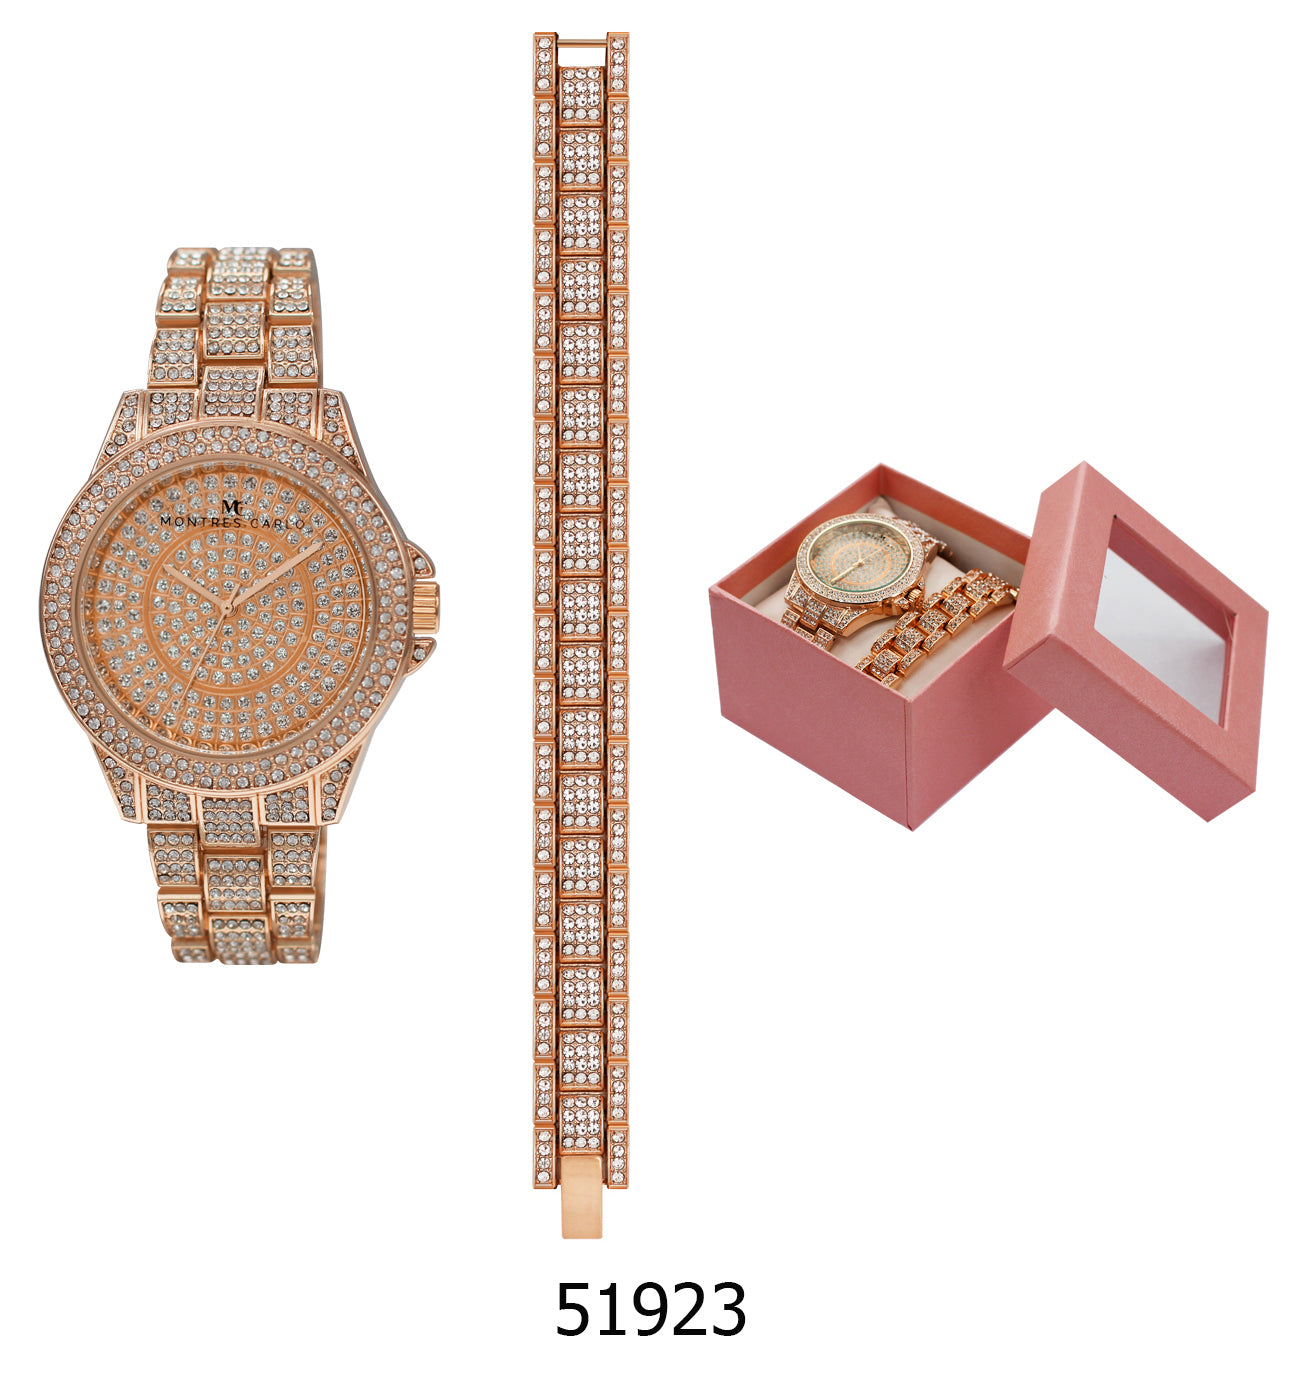 5192 - Boxed Ice Metal Band Watch with Chain